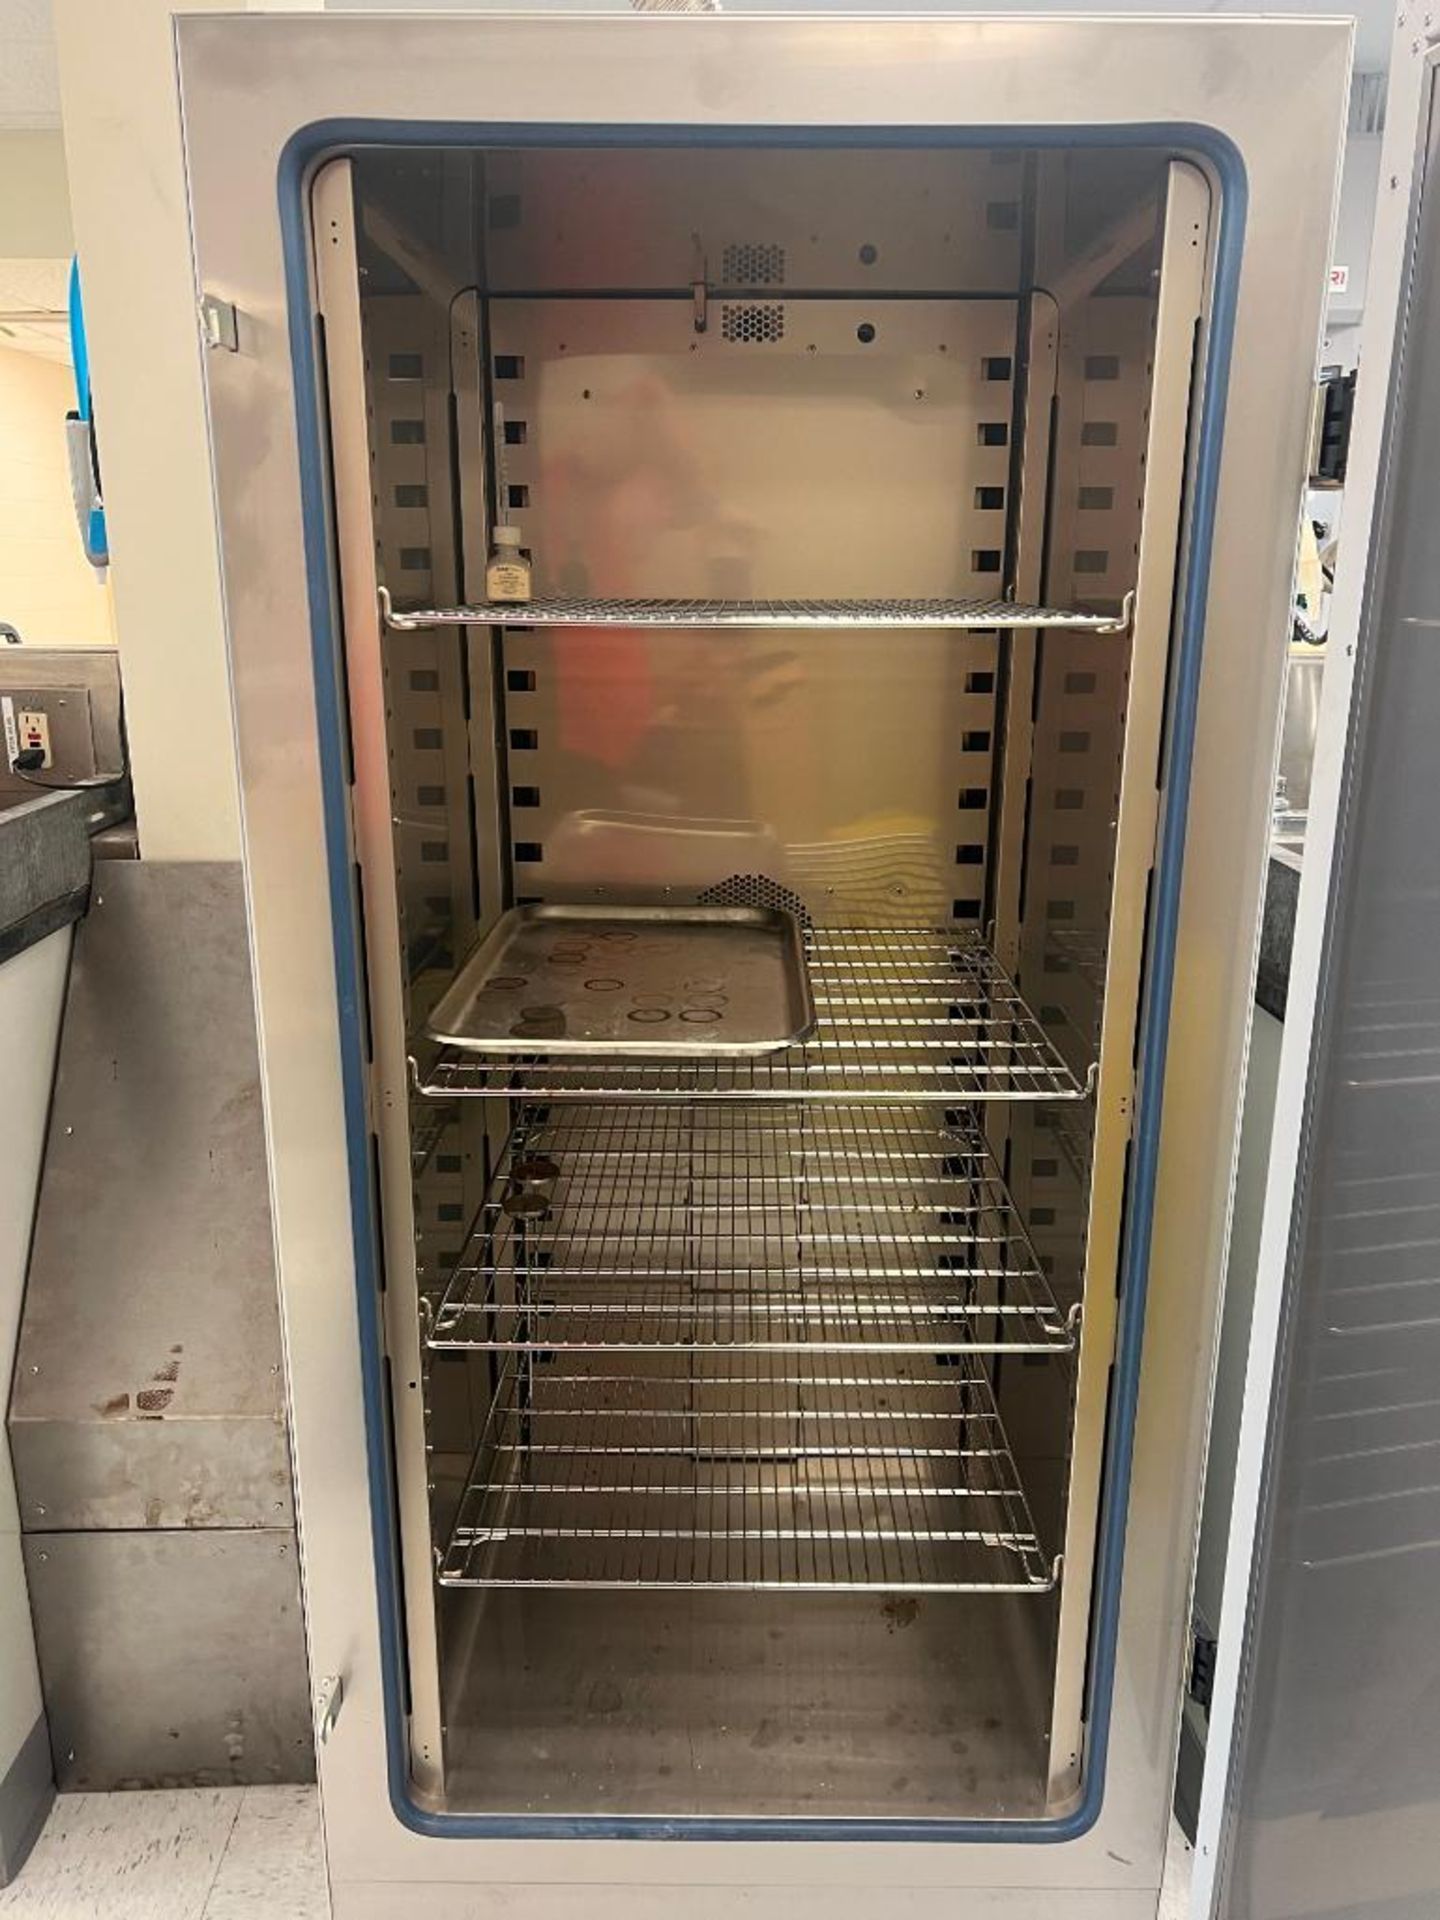 Thermo Scientific Lab Oven, Type: Heratherm OMH400 - Rigging Fee: $350 - Image 2 of 2